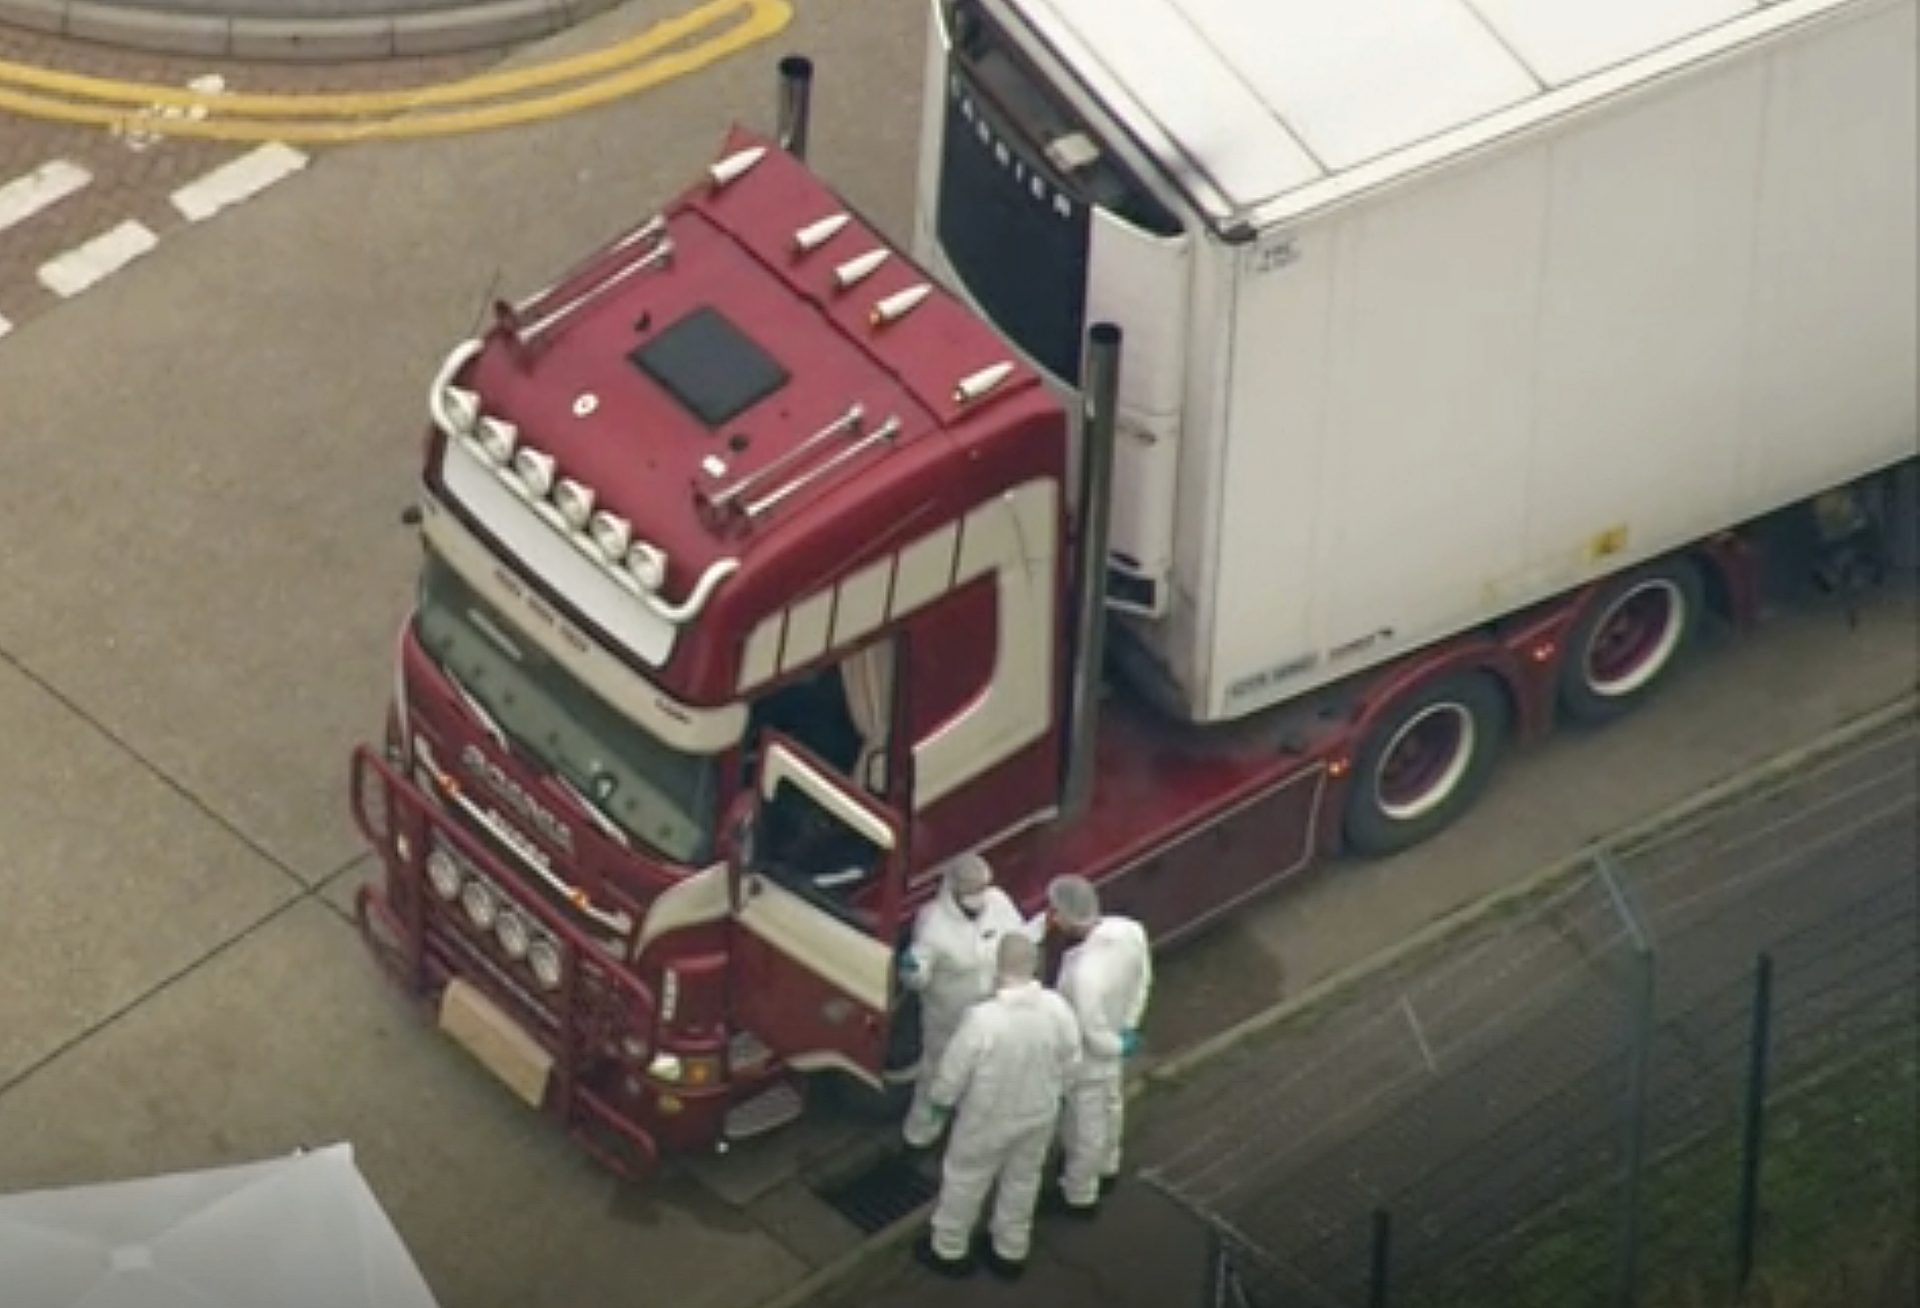 An aerial view as police forensic officers attend the scene after a truck was found to contain a large number of dead bodies, in Thurrock, South England, early Wednesday Oct. 23, 2019. Police in southeastern England said that 39 people were found dead Wednesday inside a truck container believed to have come from Bulgaria.